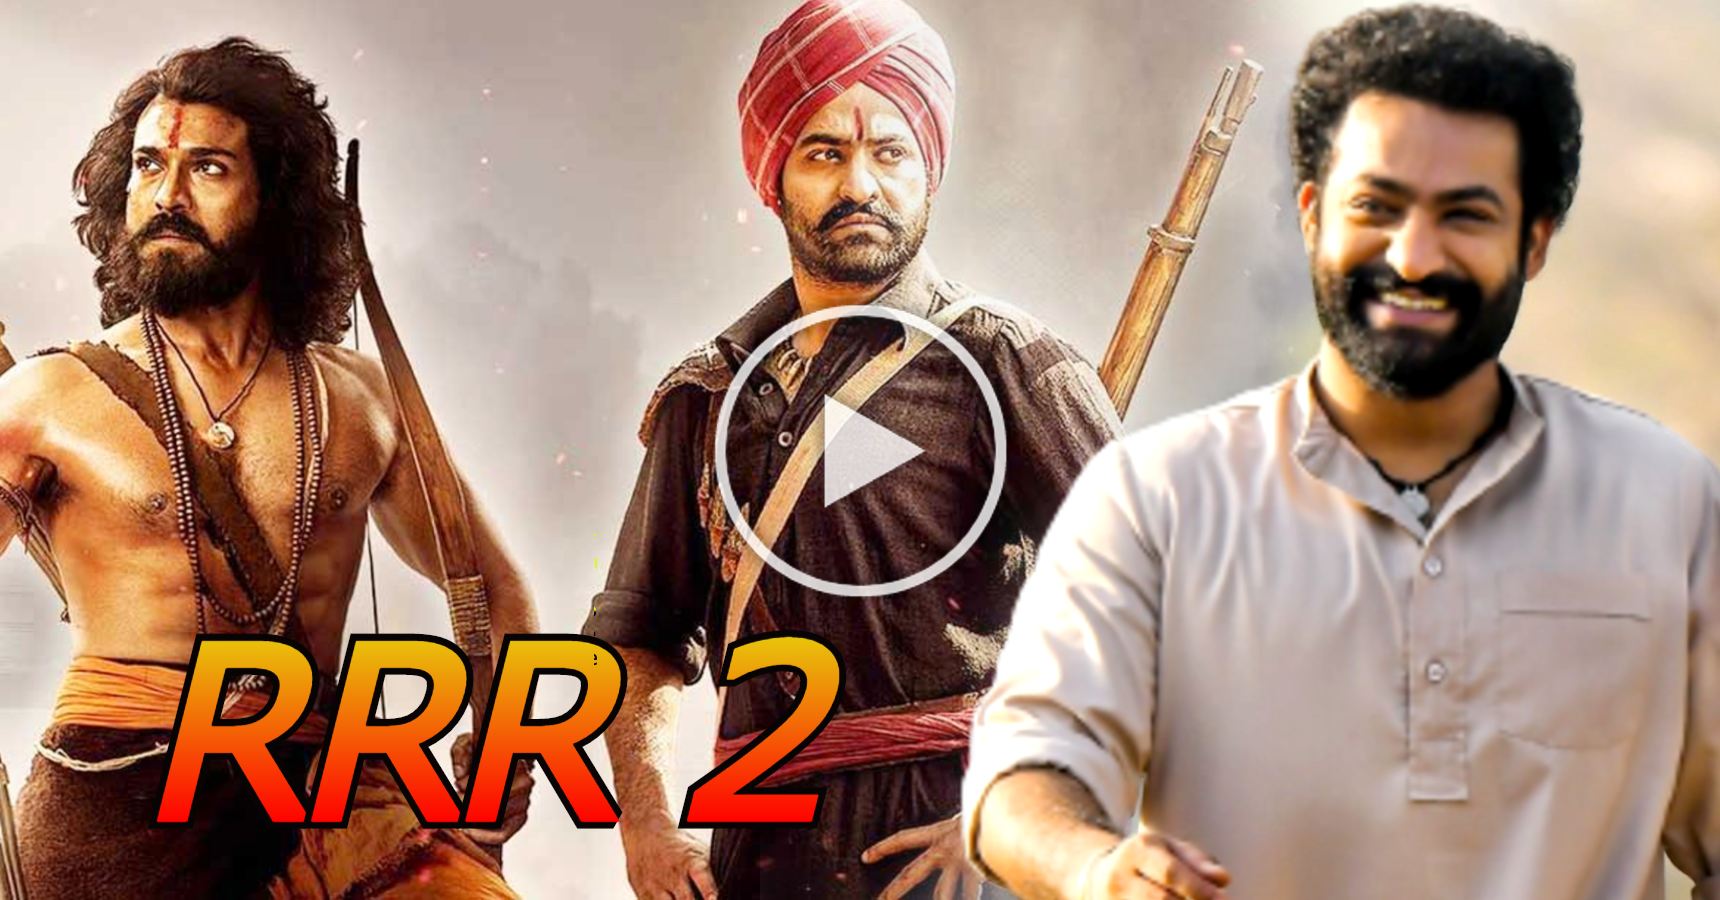 Jr NTR opens up about RRR 2 at Oscar 2023 event